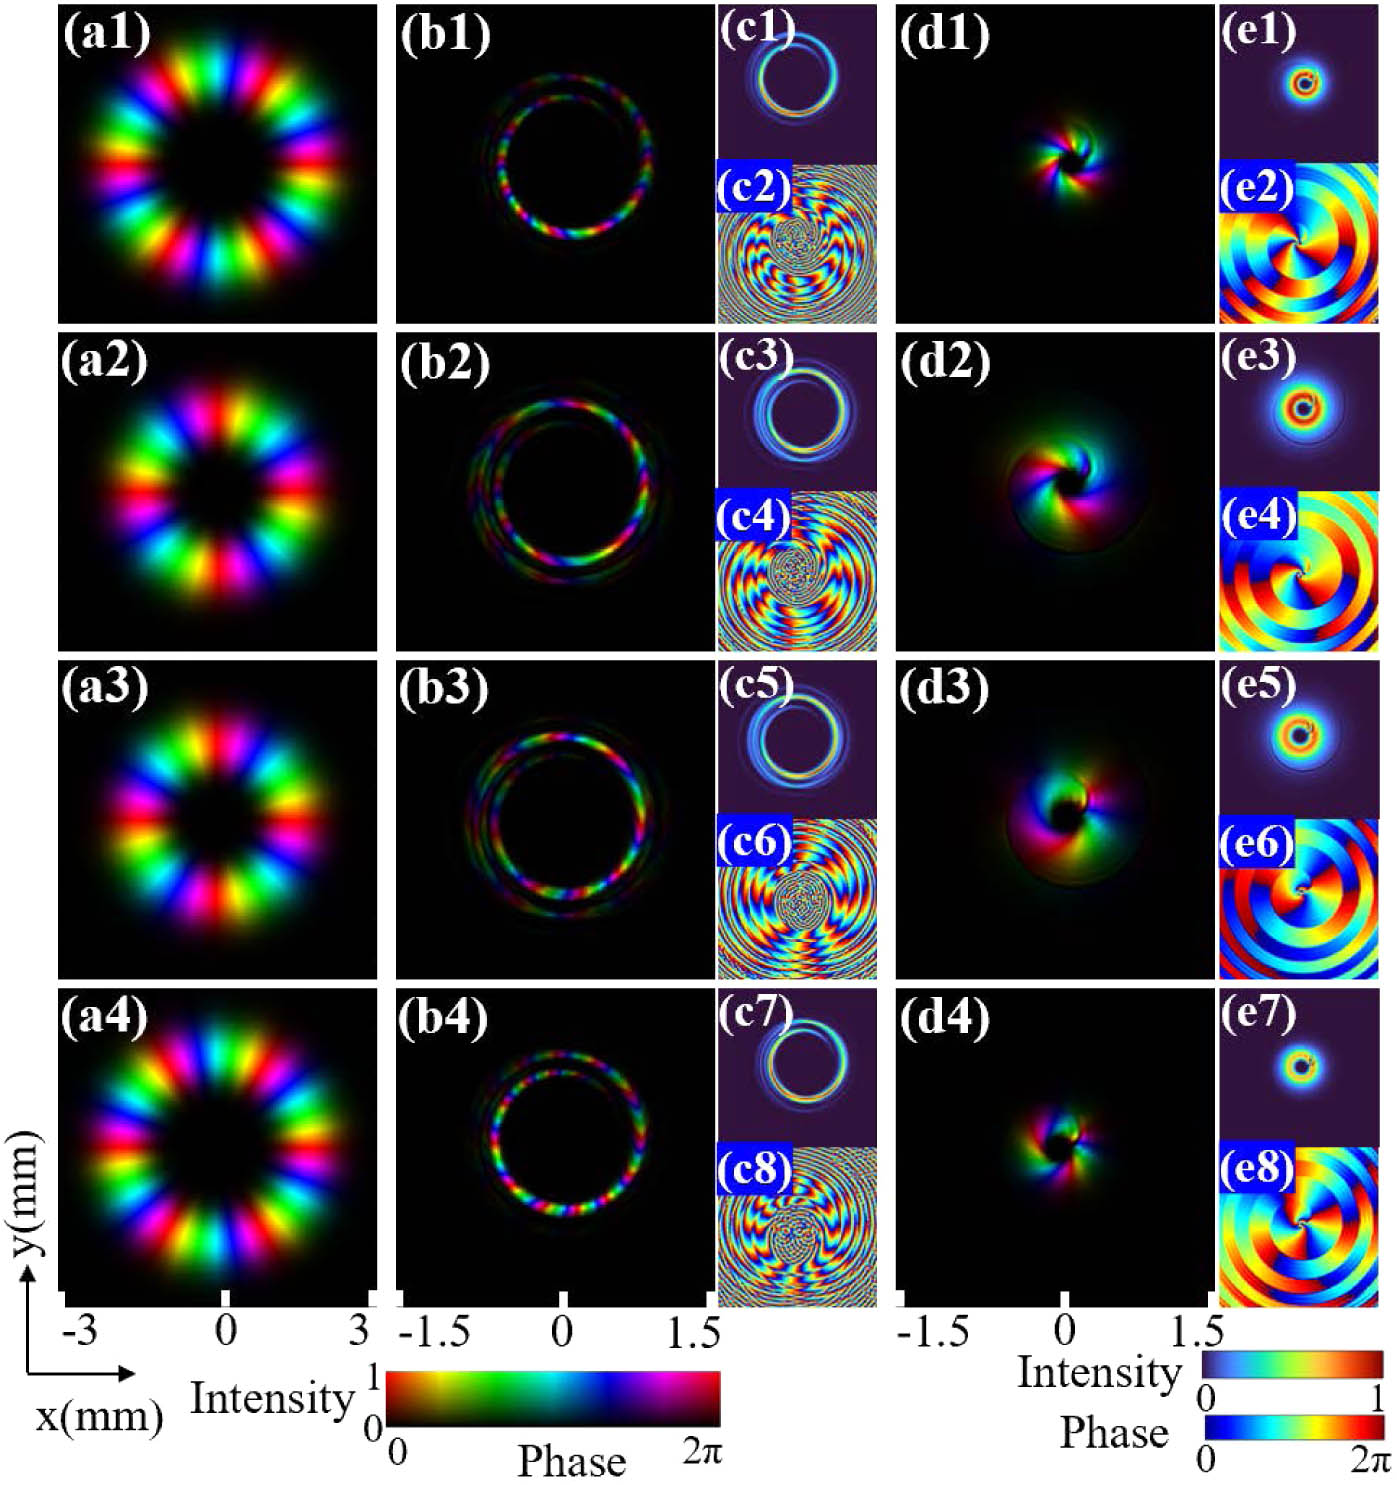 Numerical simulations of Fermat’s spiral transformation on vortex beams in the case of integer multiplication and division. (a) Input LG beams with ℓ=−6,−4,+4,+6. (b) Output beams while n=2. (c) Corresponding intensity and phase of (b). (d) Output beams while n=1/2. (e) Corresponding intensity and phase of (d).